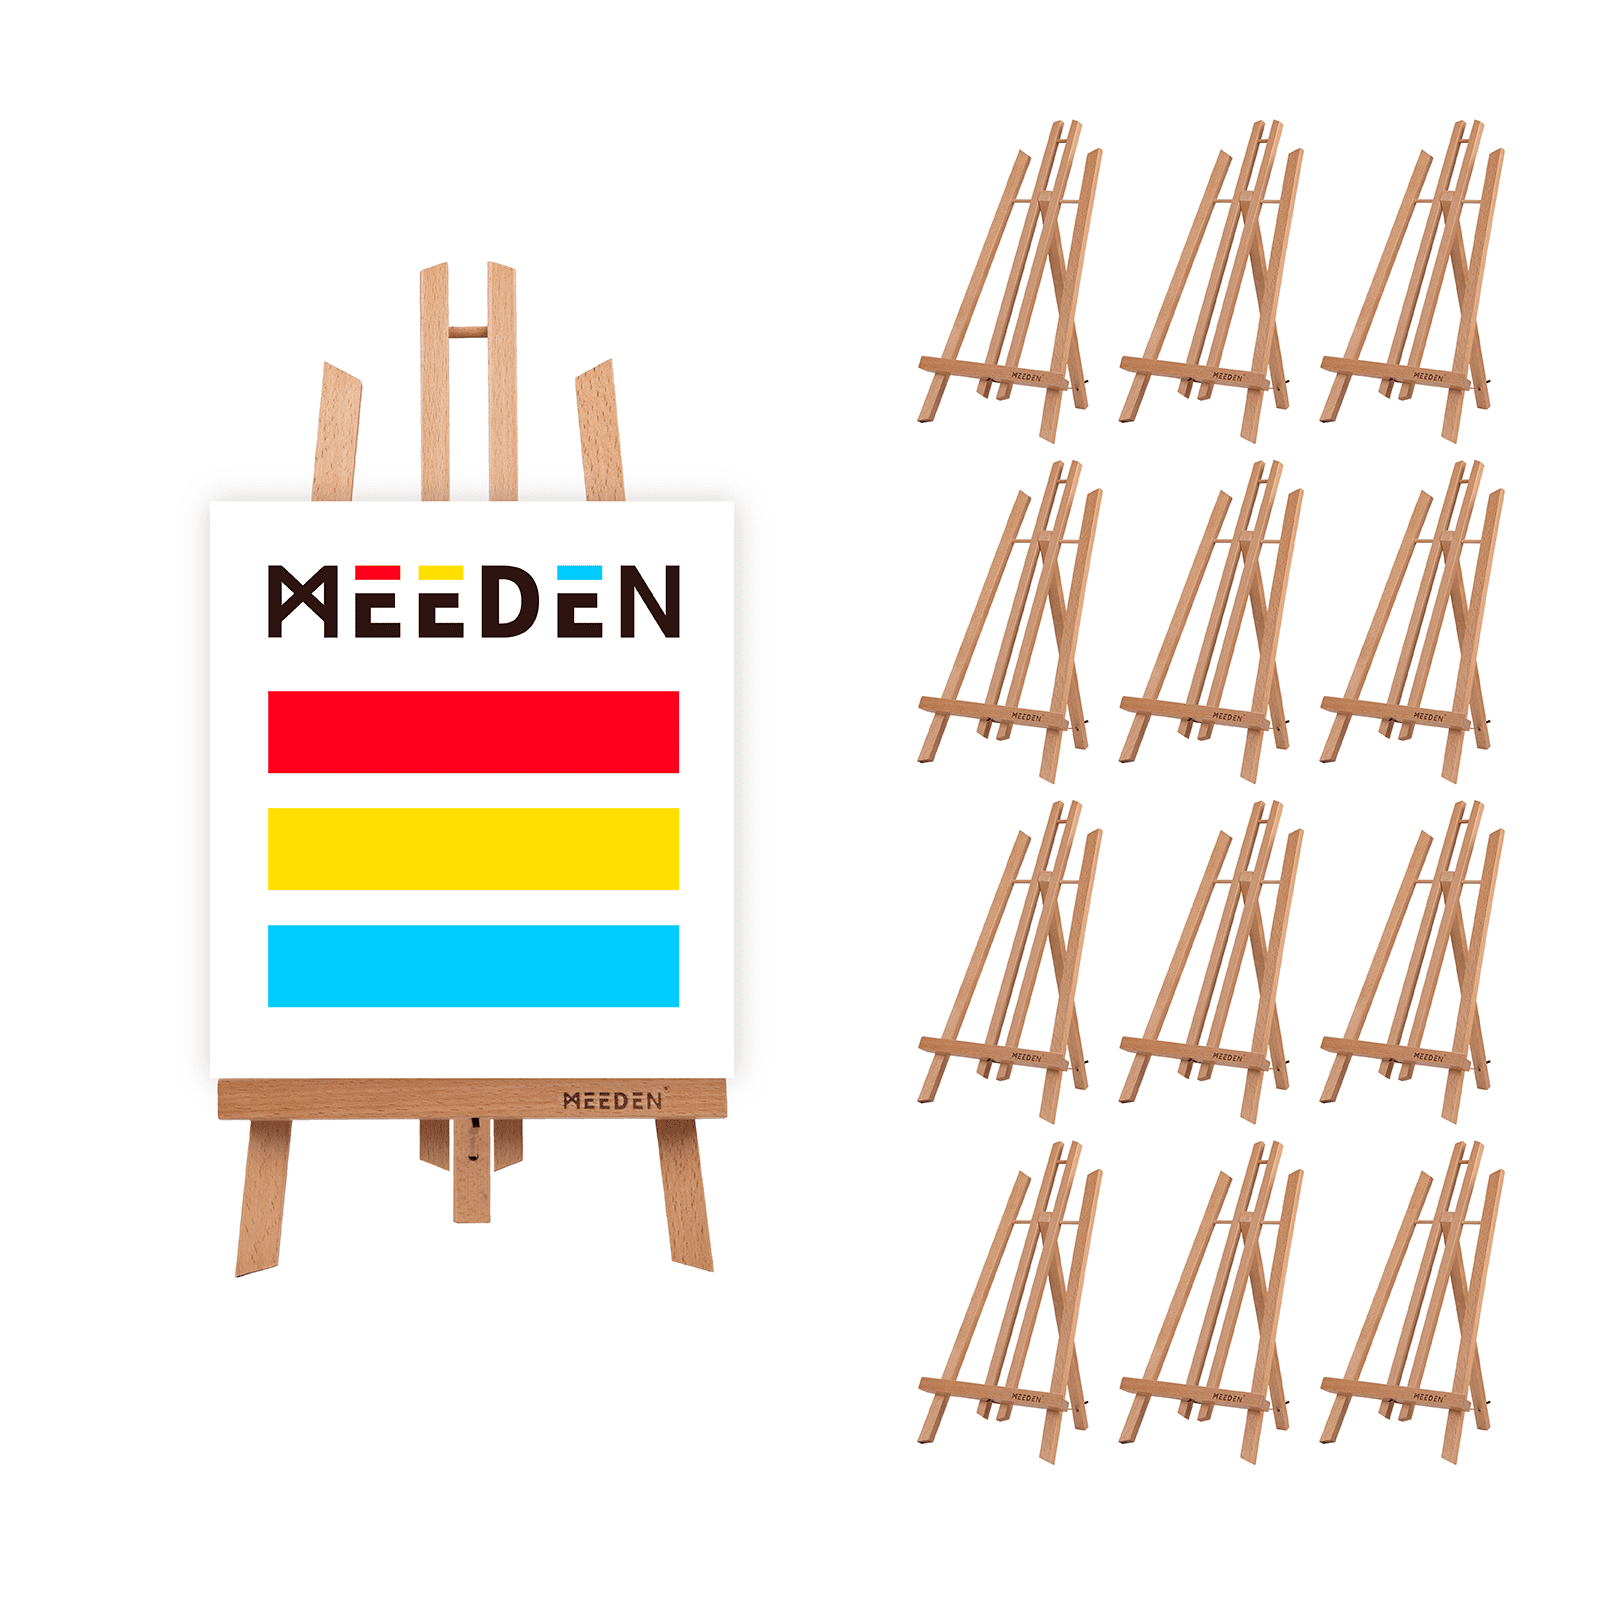 Buy 2PCS Wooden Easel16 Foldable Tabletop Display Easels for Painting  Canvas Adjustable Art Canvas Easel Stand for Kids Students Adults Artist